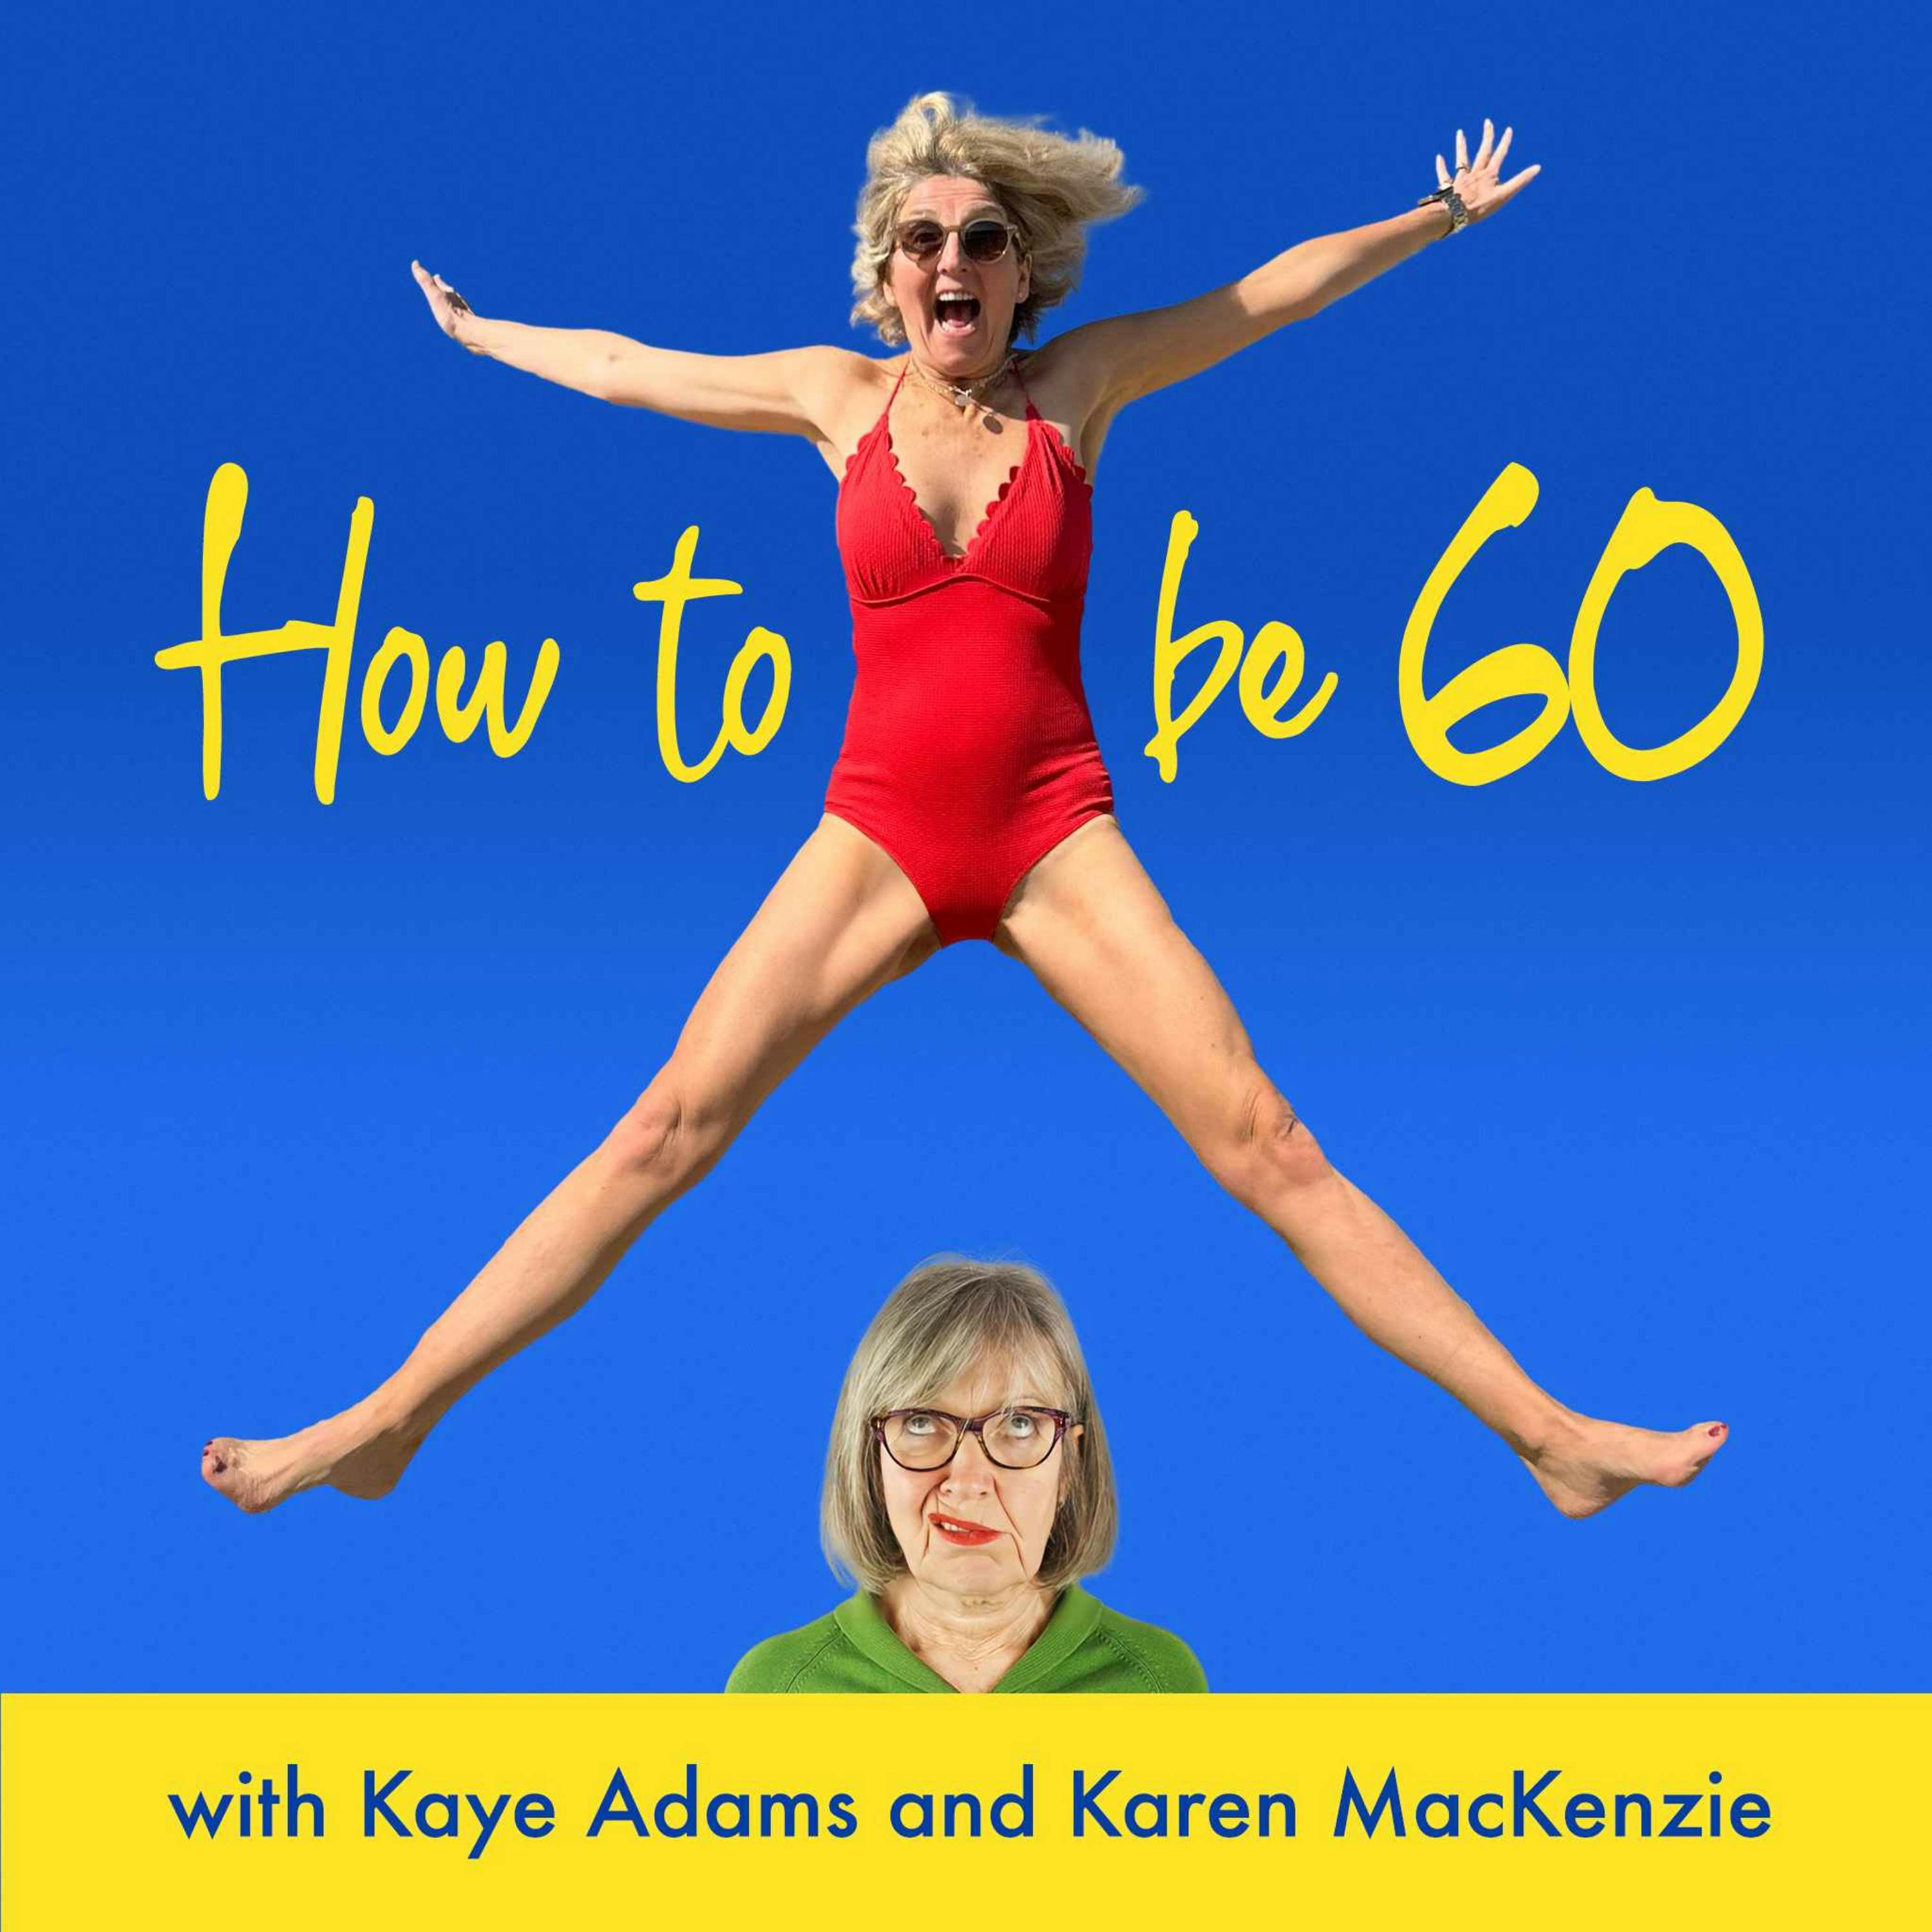 Kaye & Karen Read Your Emails (While Kaye Tries To Find Out Karen's Big Secret!)